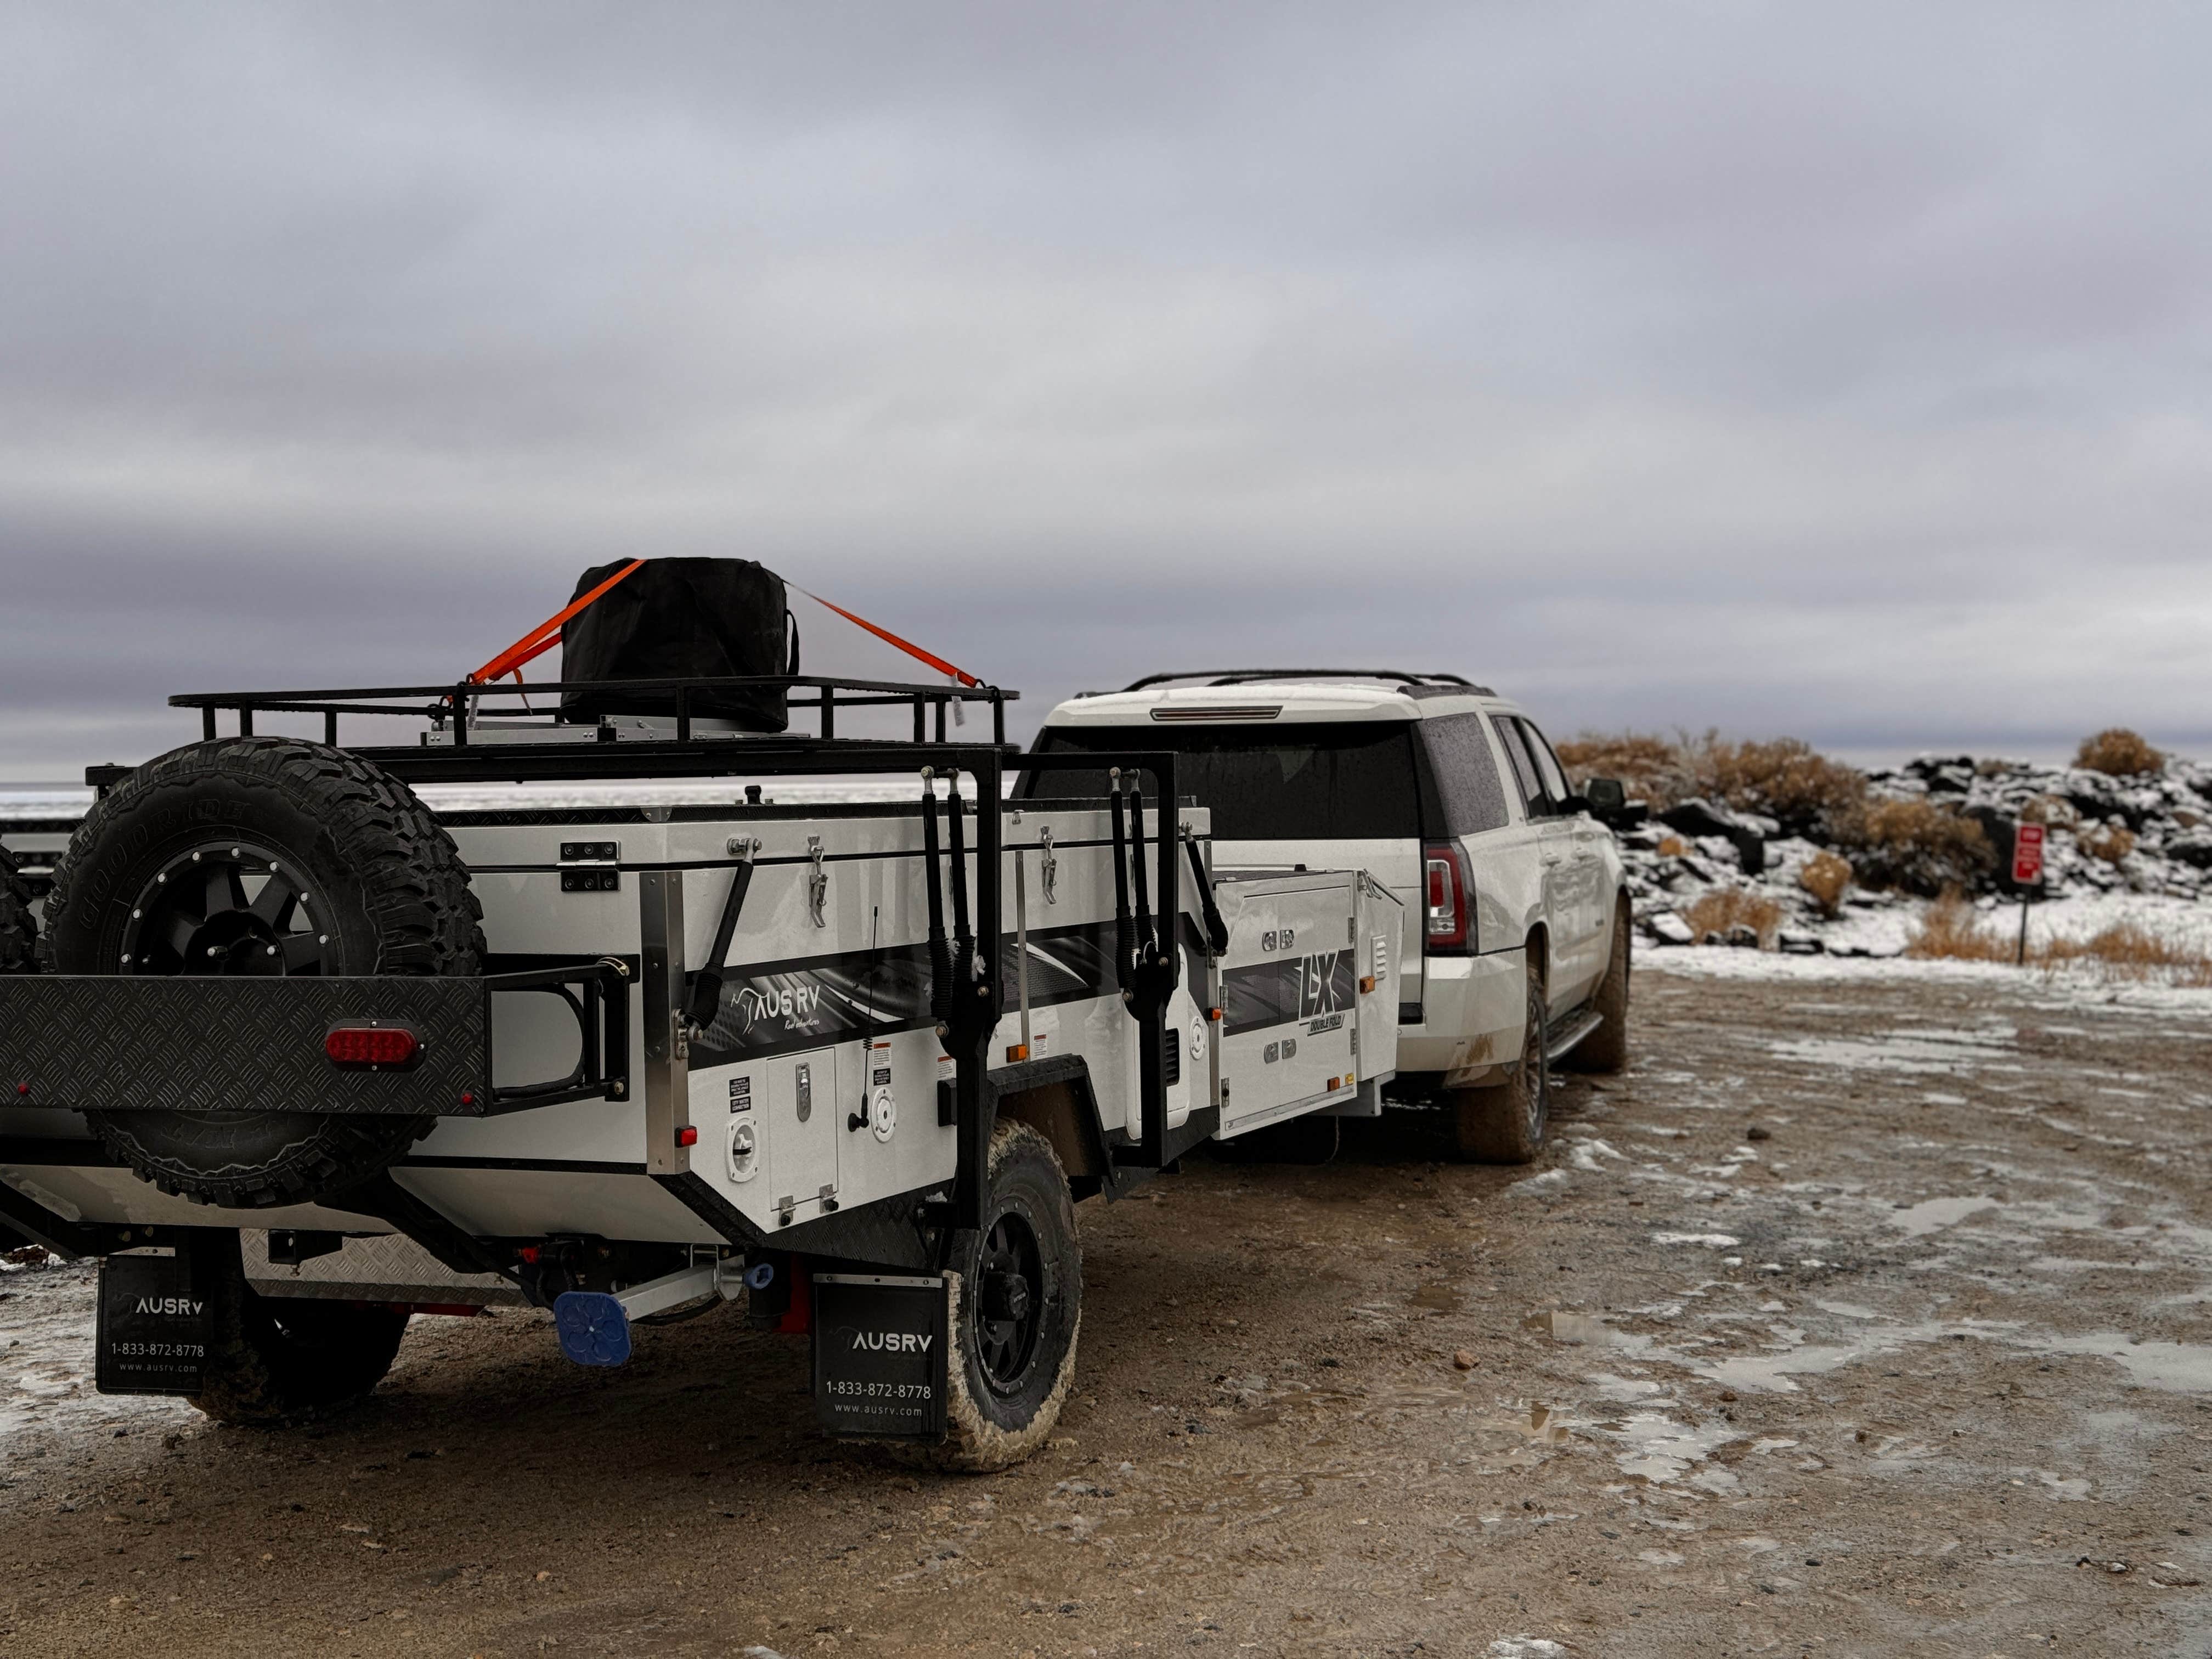 Camper submitted image from Spiral Jetty - 4